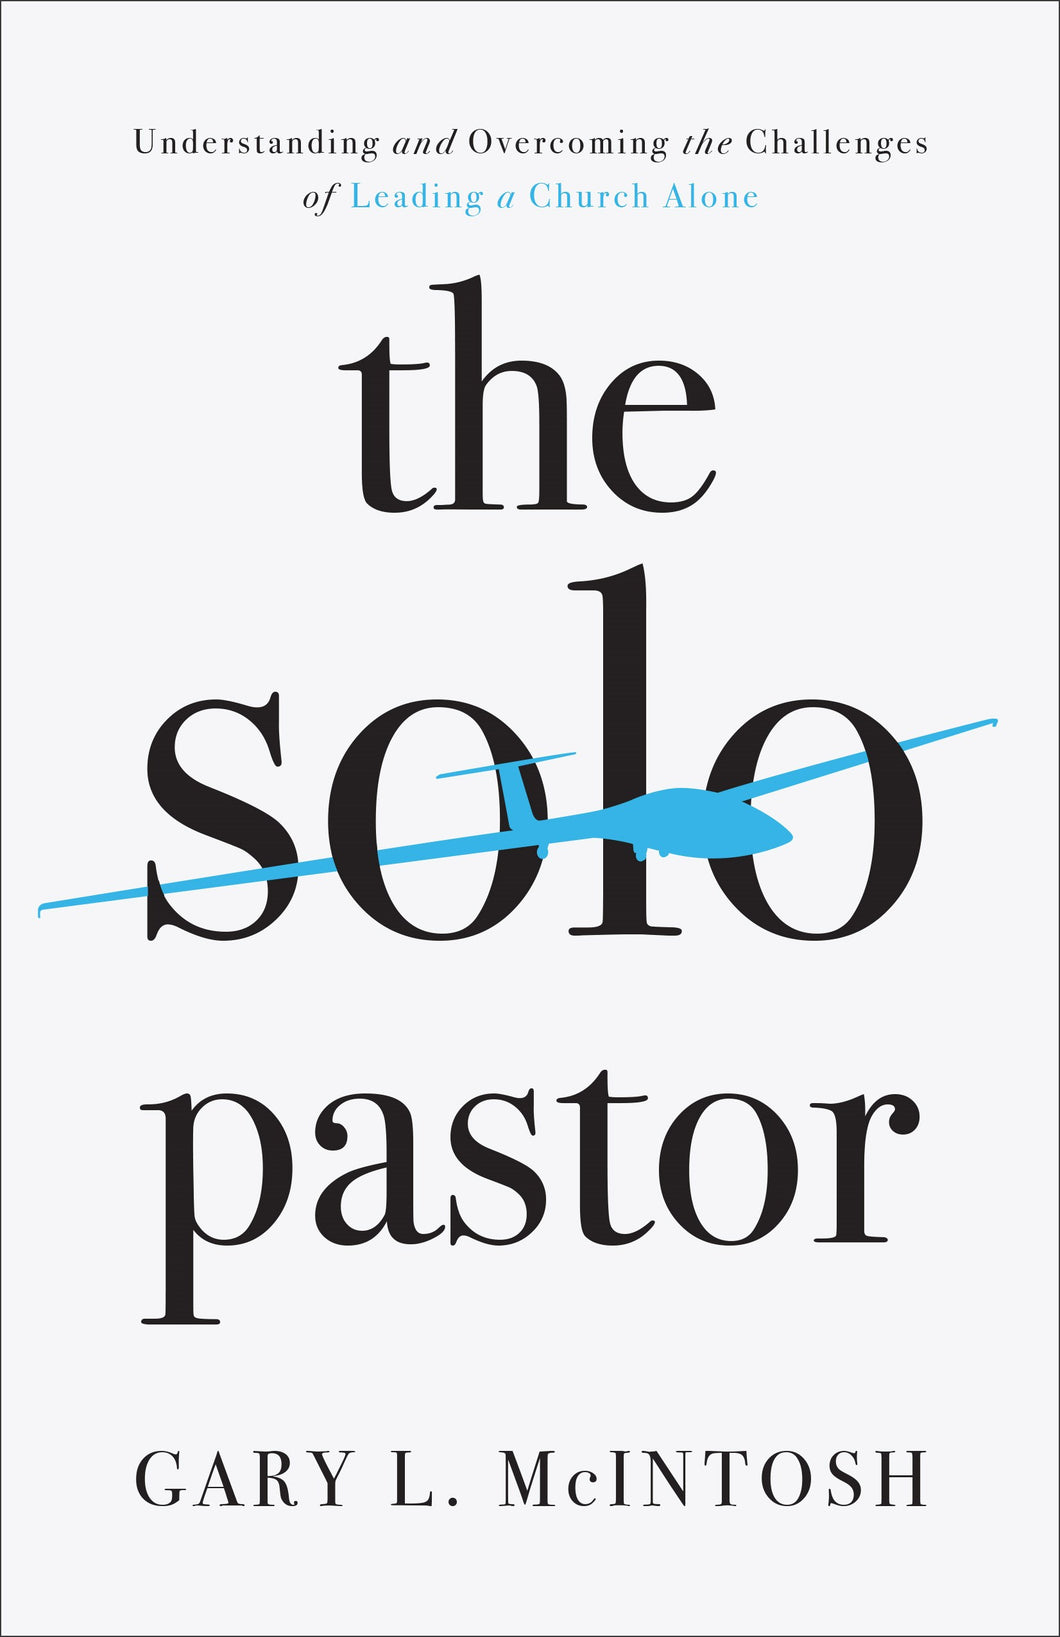 The Solo Pastor